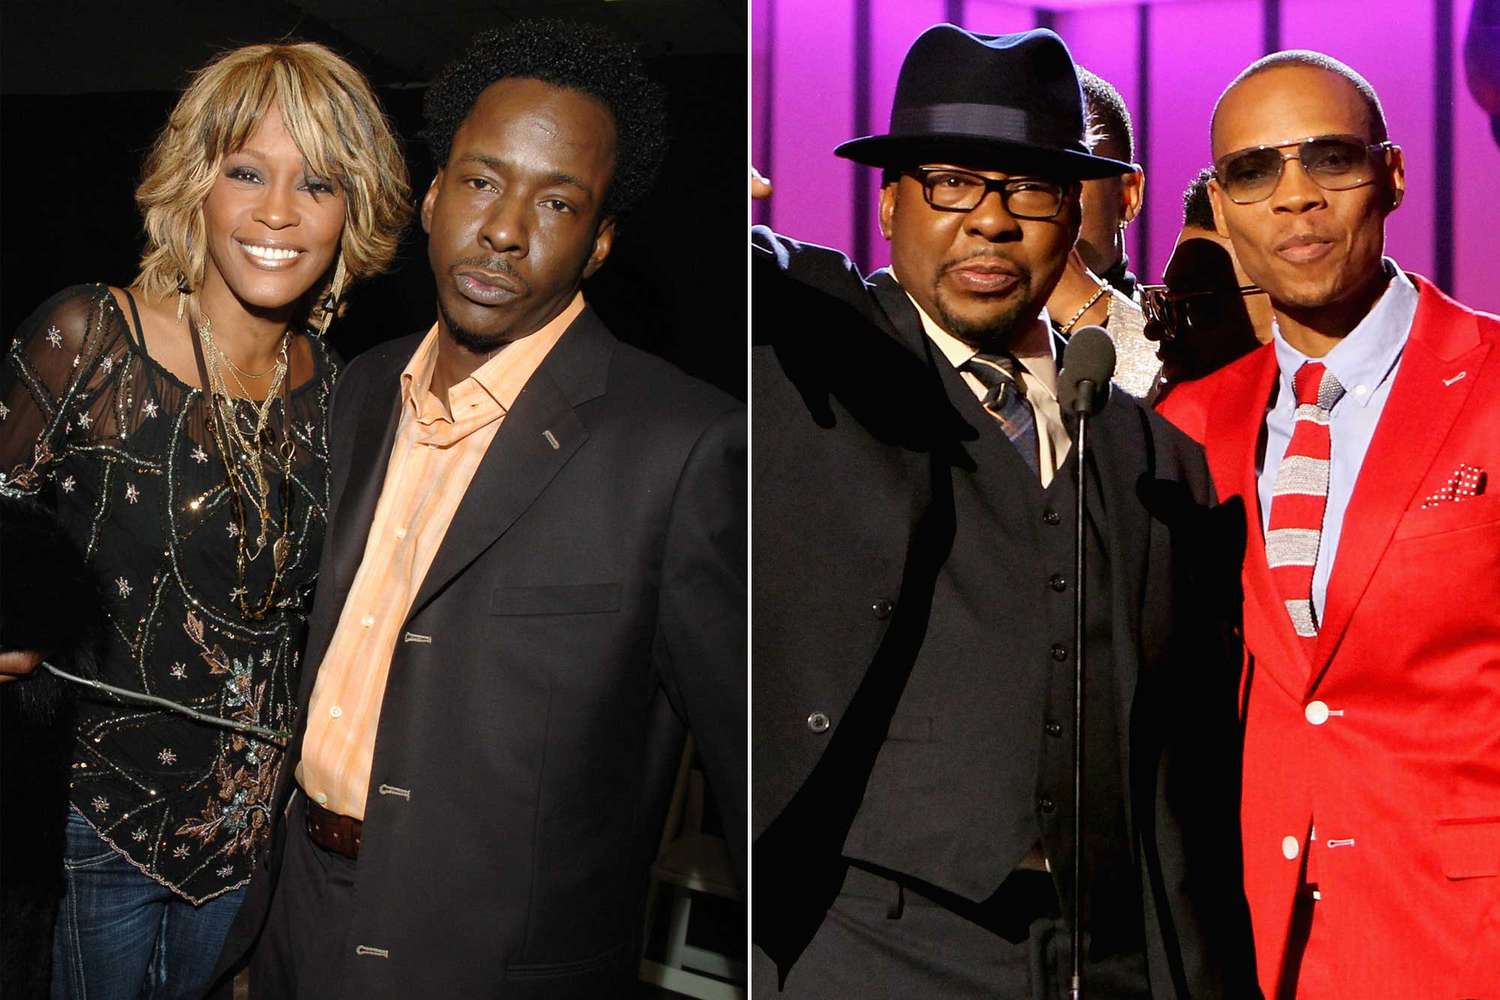 Bobby Brown got support from members of New Edition after Whitney Houston's death